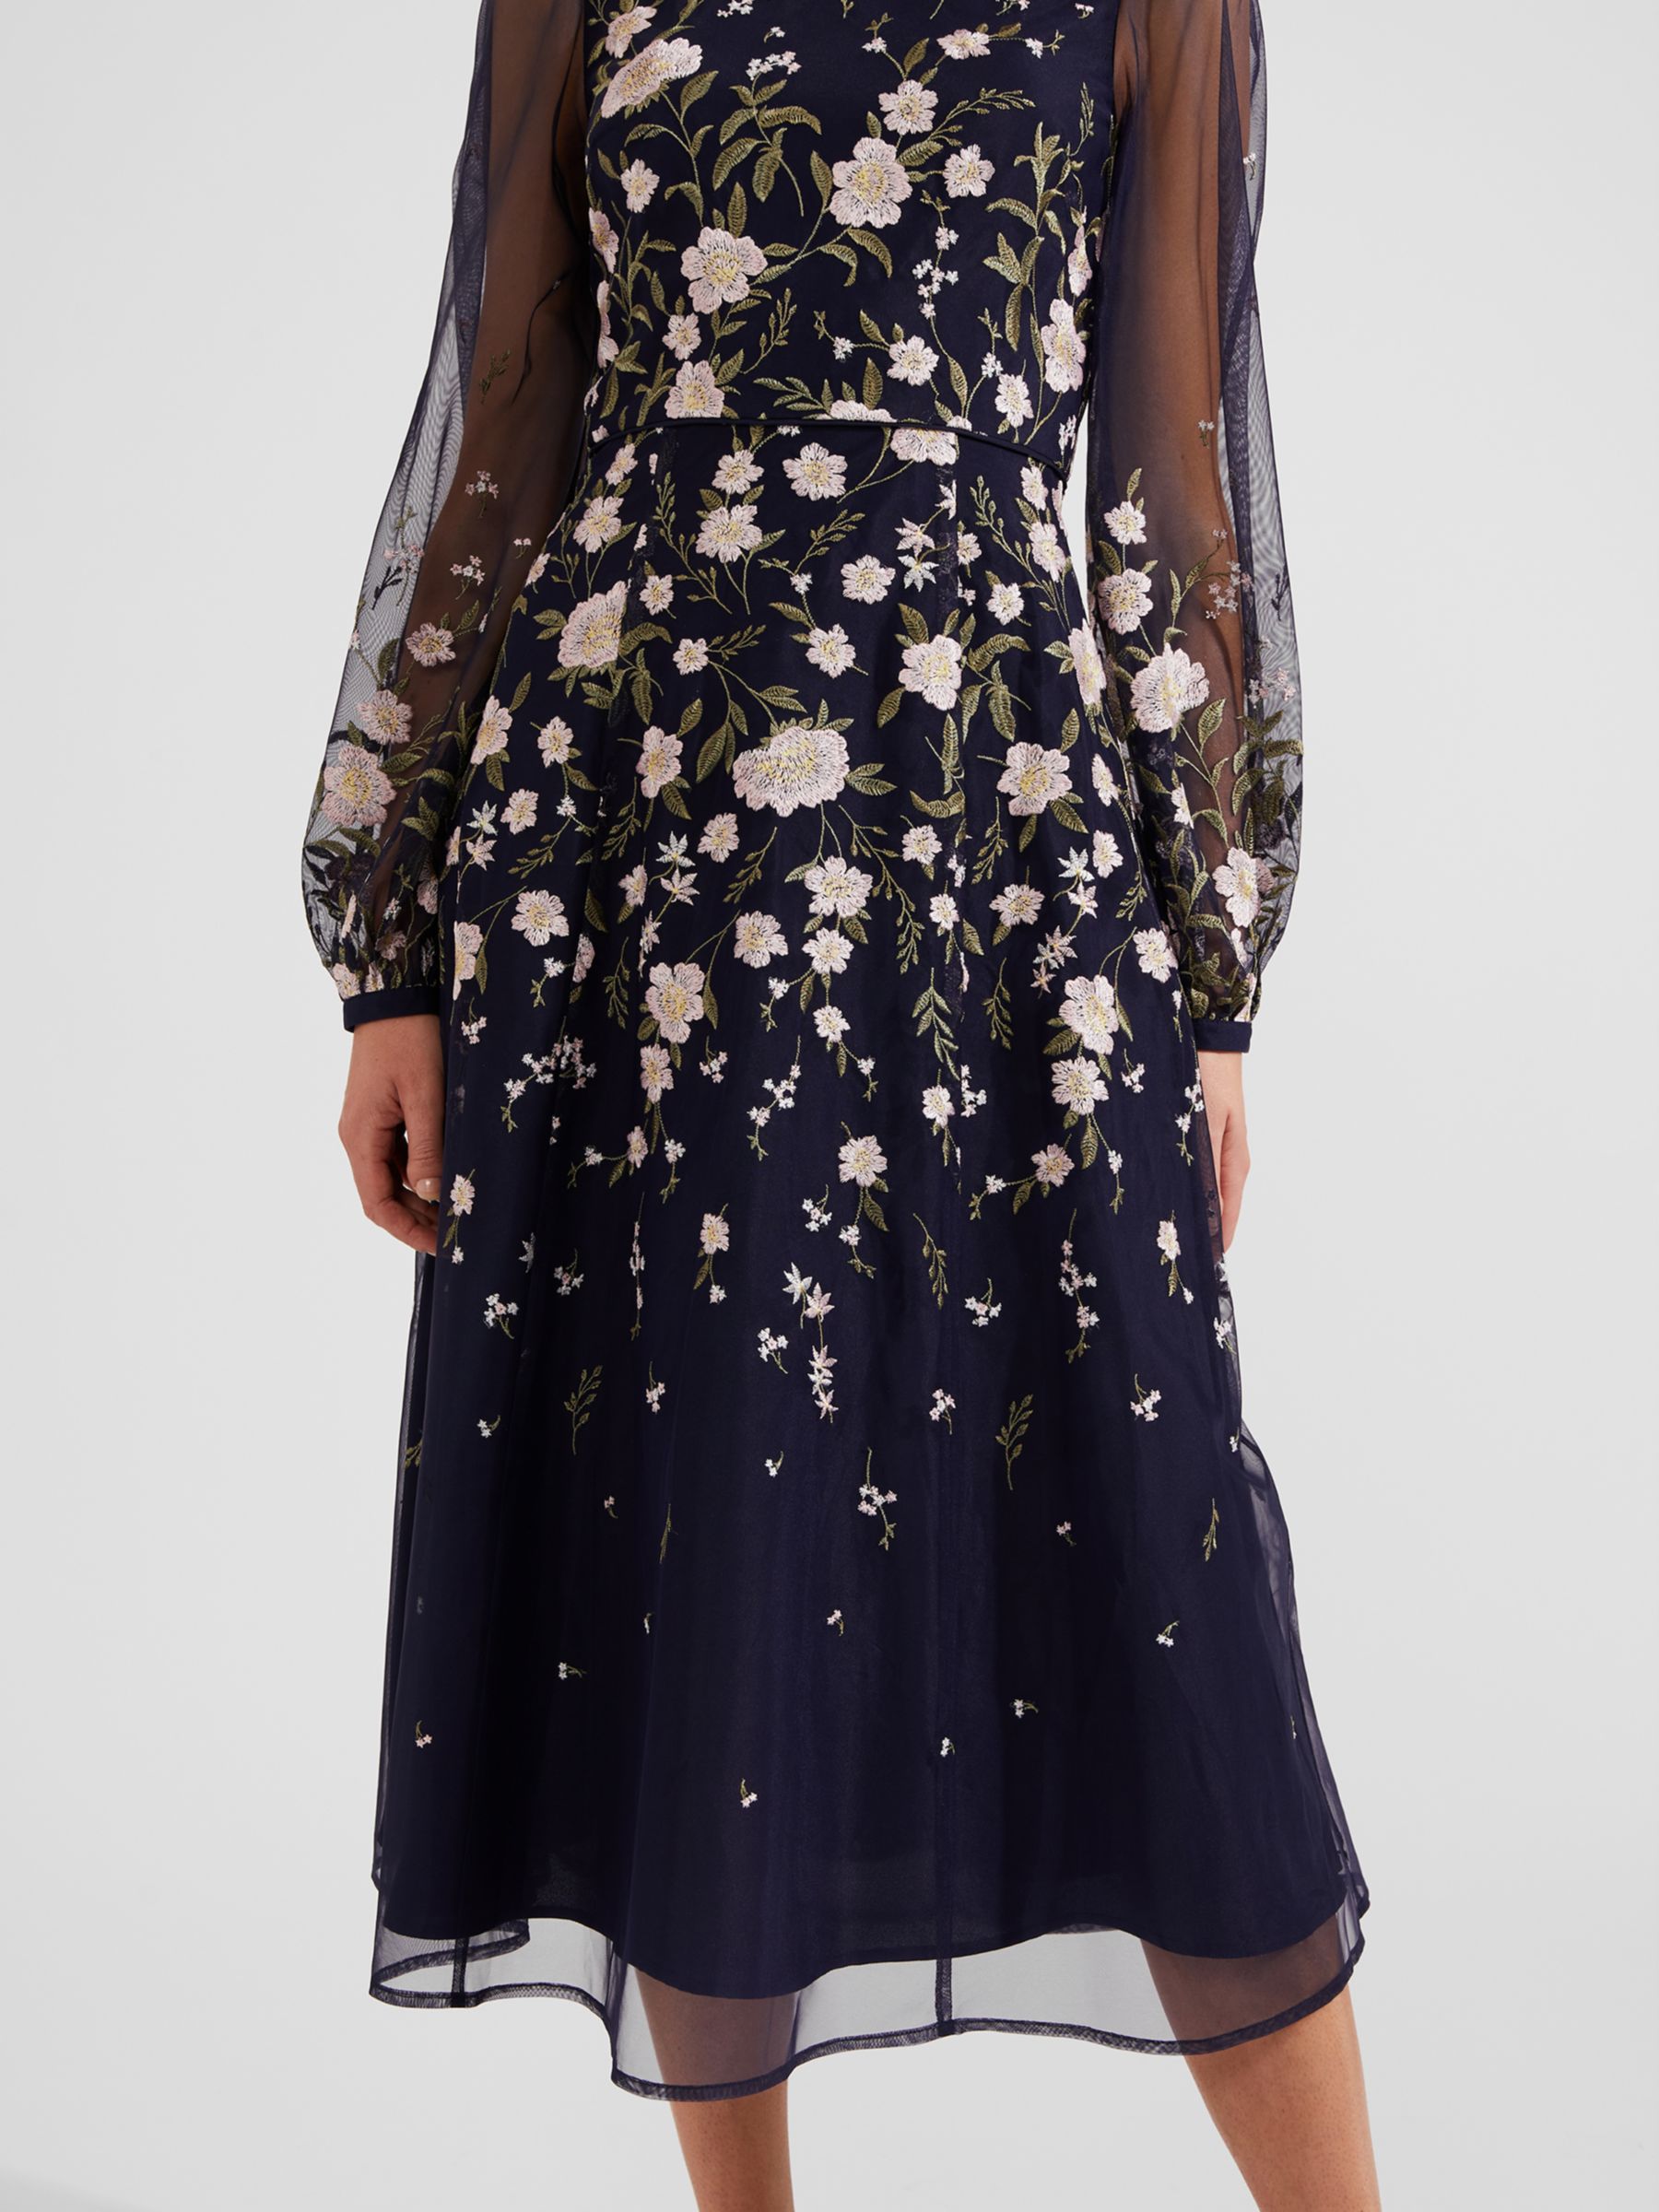 Buy Hobbs Lois Floral Embroidered Midi Dress, Navy/Multi Online at johnlewis.com